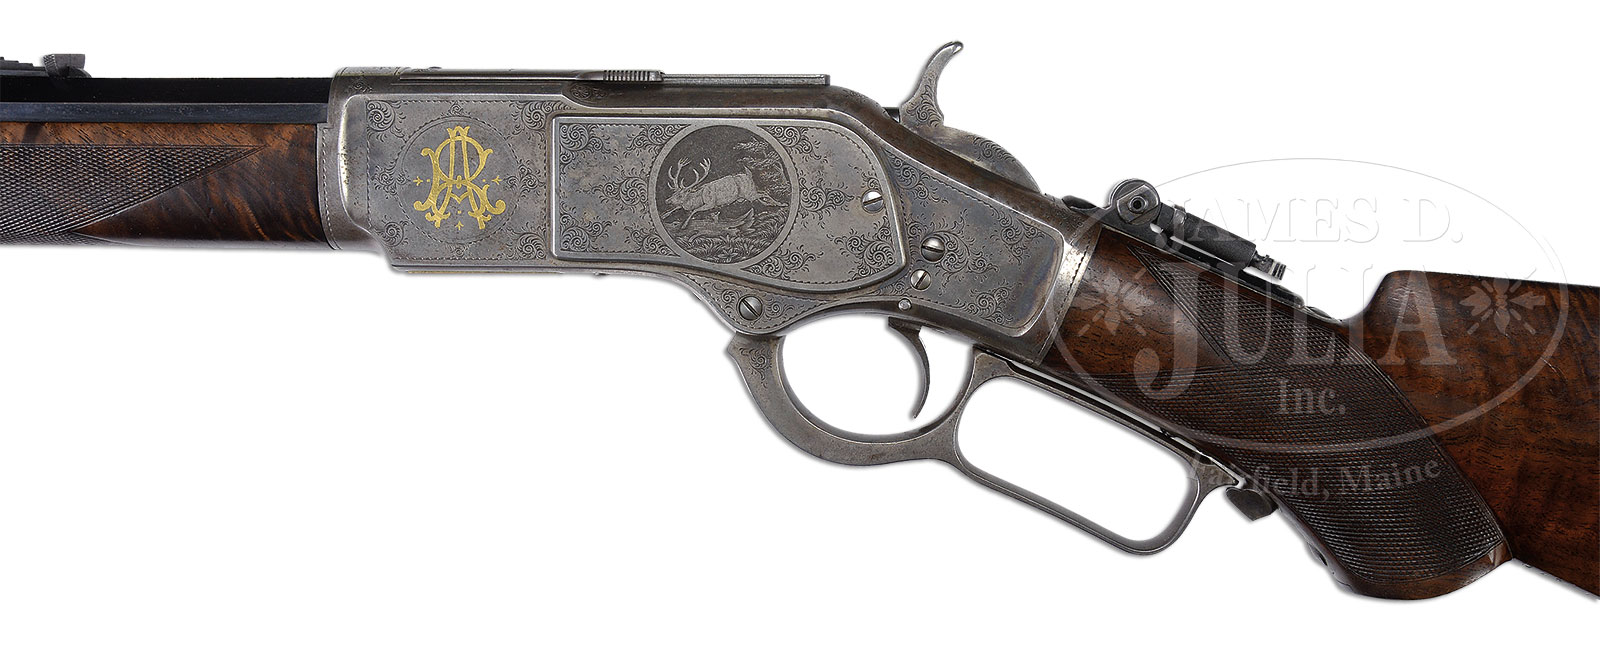 EXTRAORDINARILY RARE JOHN ULRICH ENGRAVED GOLD INLAID WINCHESTER 2nd MODEL 1873 DELUXE LEVER ACTION RIFLE, IDENTIFIED TO FAMED SPORTSMAN COL. ARCHIBALD ROGERS WITH FACTORY LETTER.